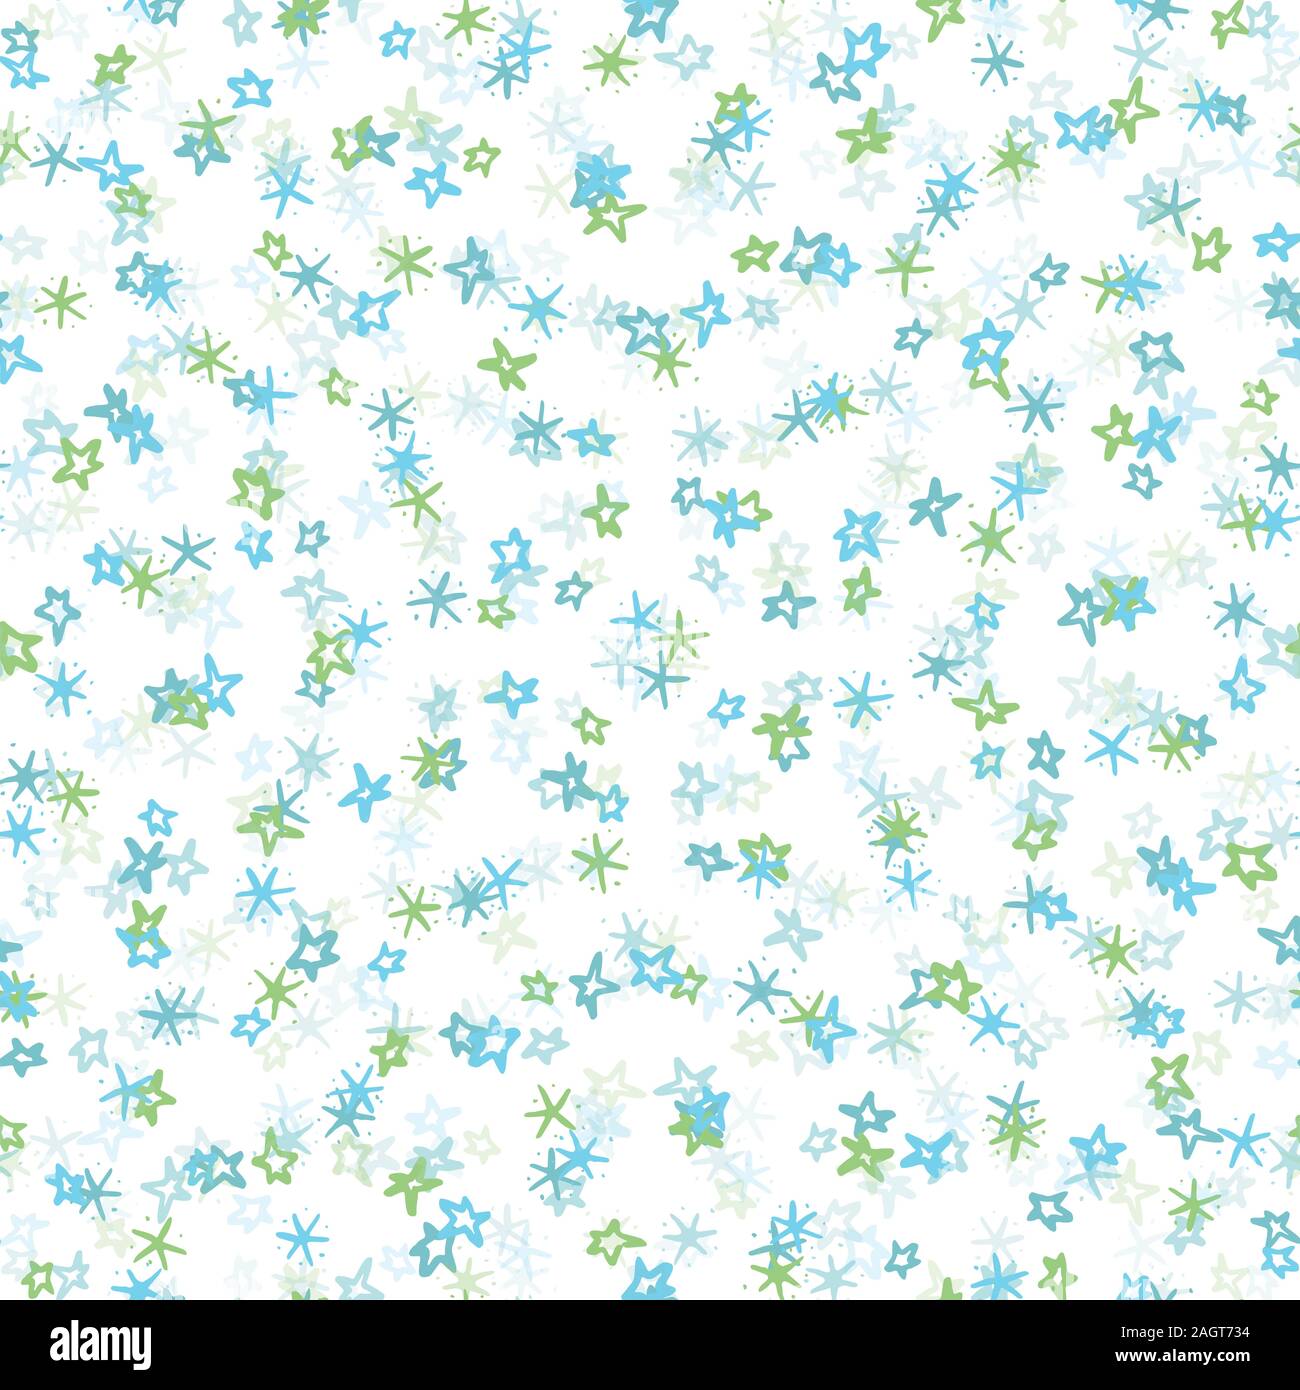 Y2k Icons Fabric, Wallpaper and Home Decor